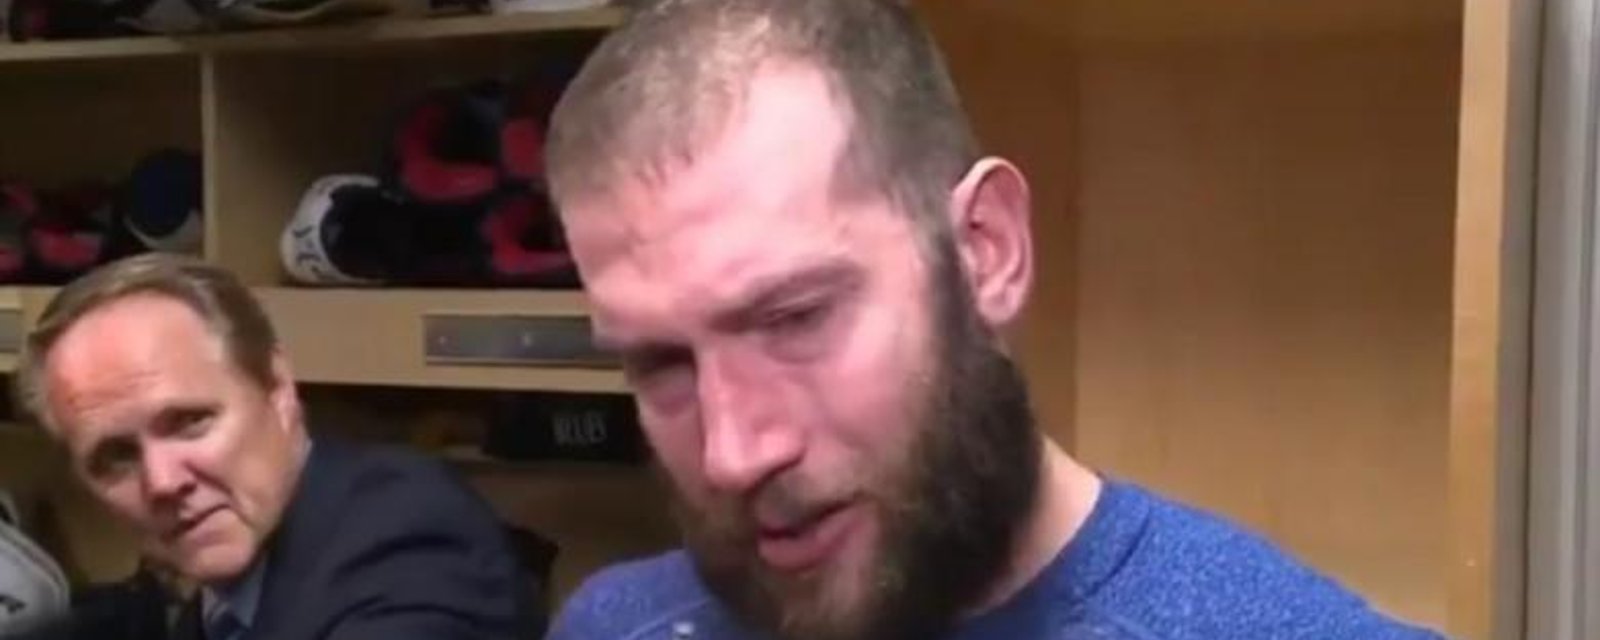 David Backes breaks down in tears after being eliminated from the playoffs.